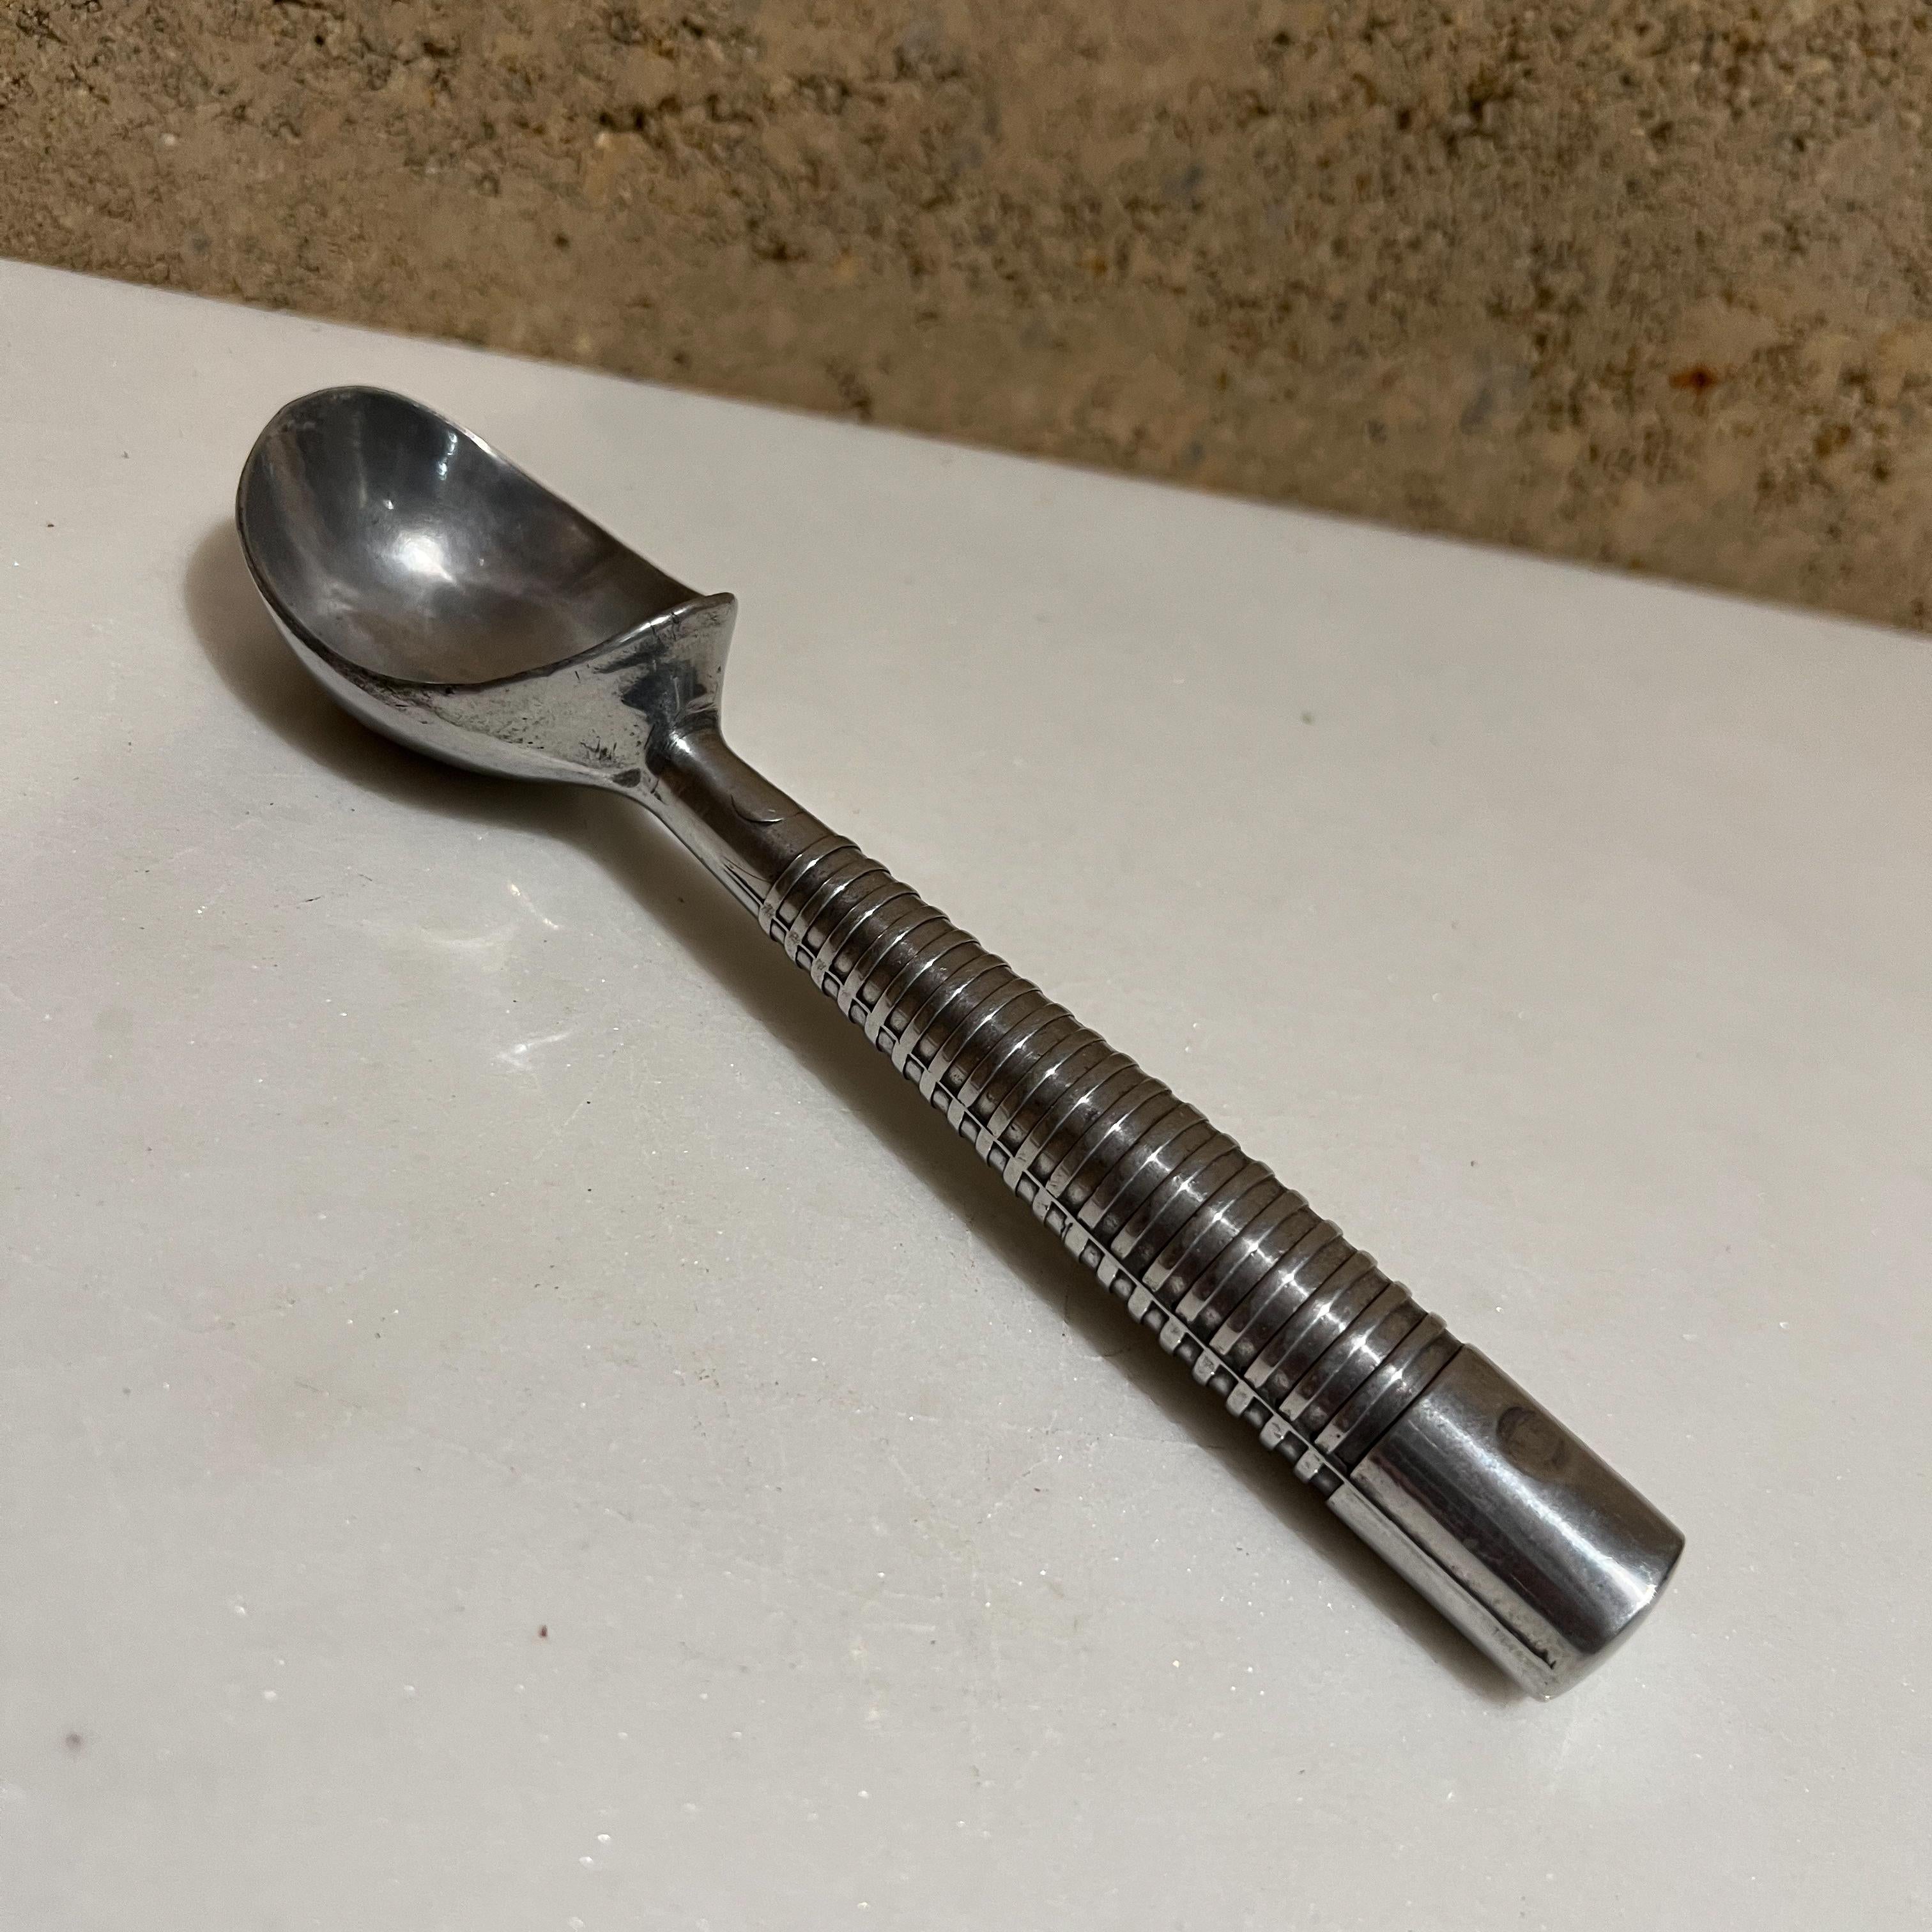 1950s Modern polished aluminum ice cream scooper Airstream style 
Ribbed handle 
Stamped Taiwan
Measures 1.25 x 7 long
Preowned Original unrestored Vintage Condition
Refer to images.